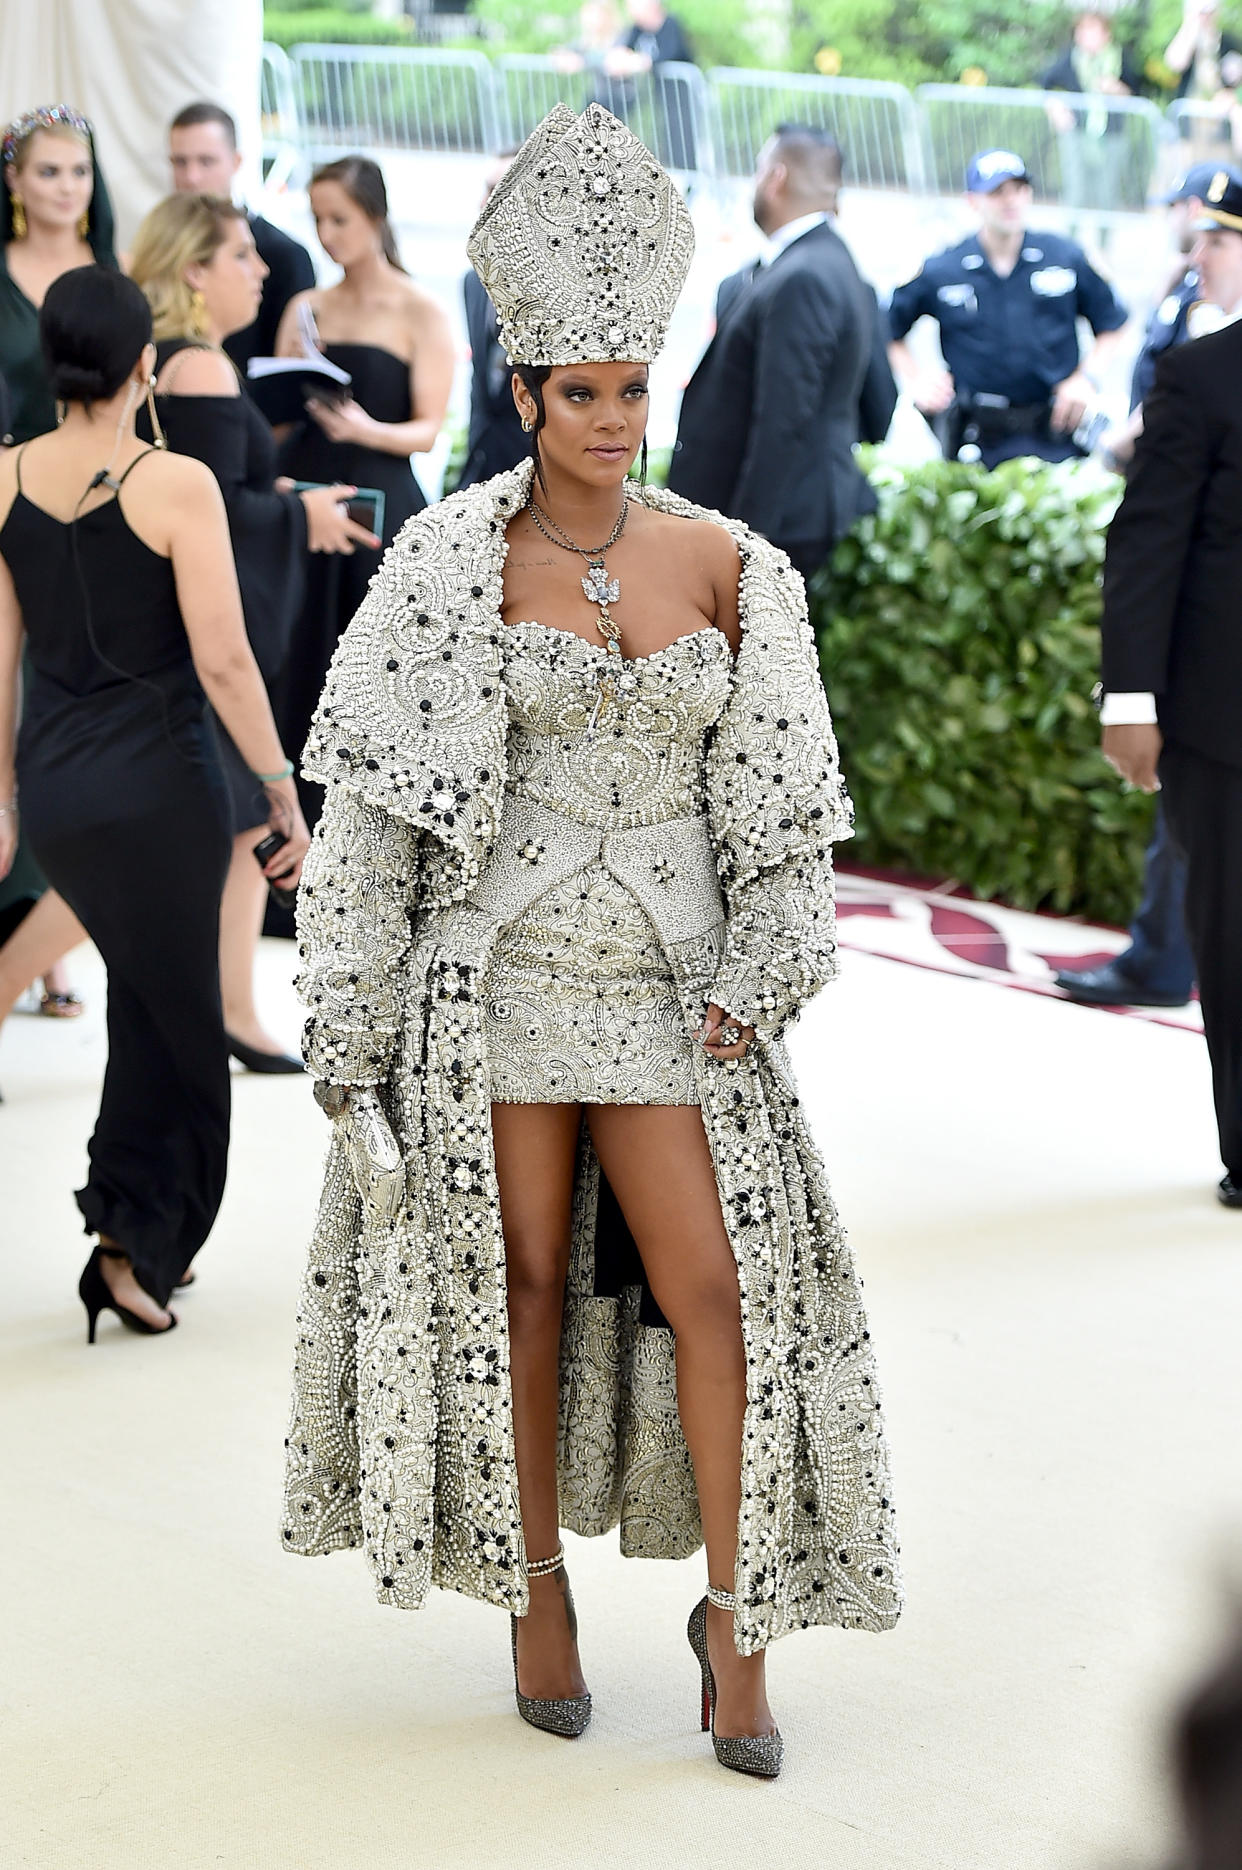 Rihanna at the Heavenly Bodies: Fashion & The Catholic Imagination Costume Institute Gala in 2018. (Getty Images)